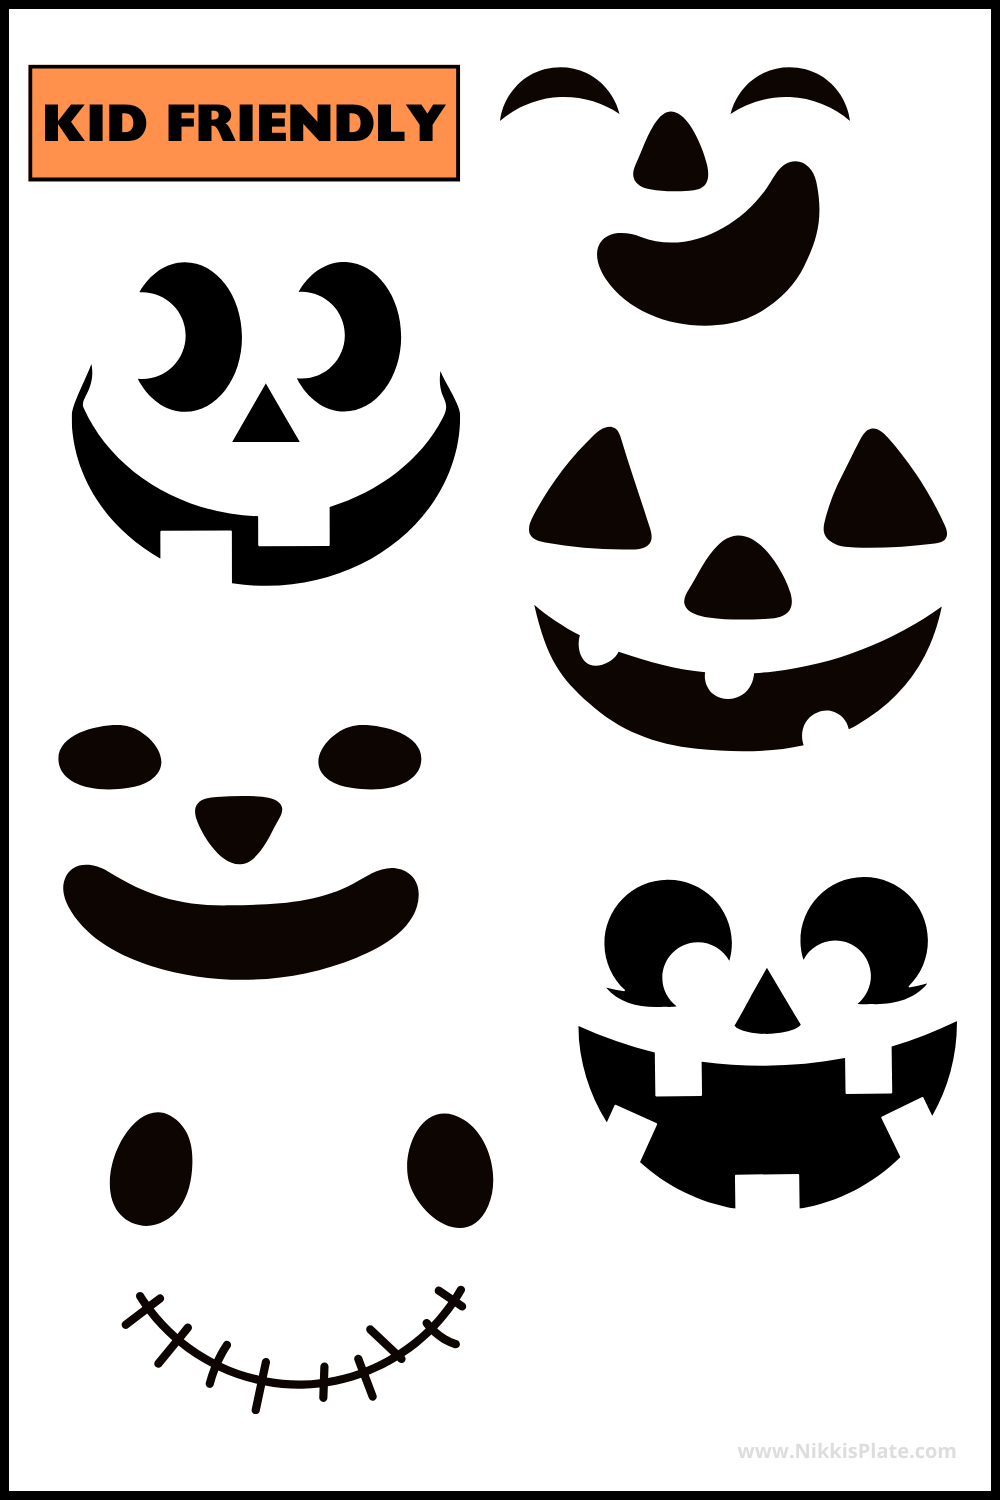 Kid Friendly - Unleash your creativity this Halloween with our 25 FREE Creepy Jack O'lantern Faces Printable Stencils! Turn your pumpkins into the creepiest on the street with my various spooky stencil designs. Free and easy to use, because I believe in more treats, less tricks! Immerse in the Halloween spirit and let the carving fun begin!